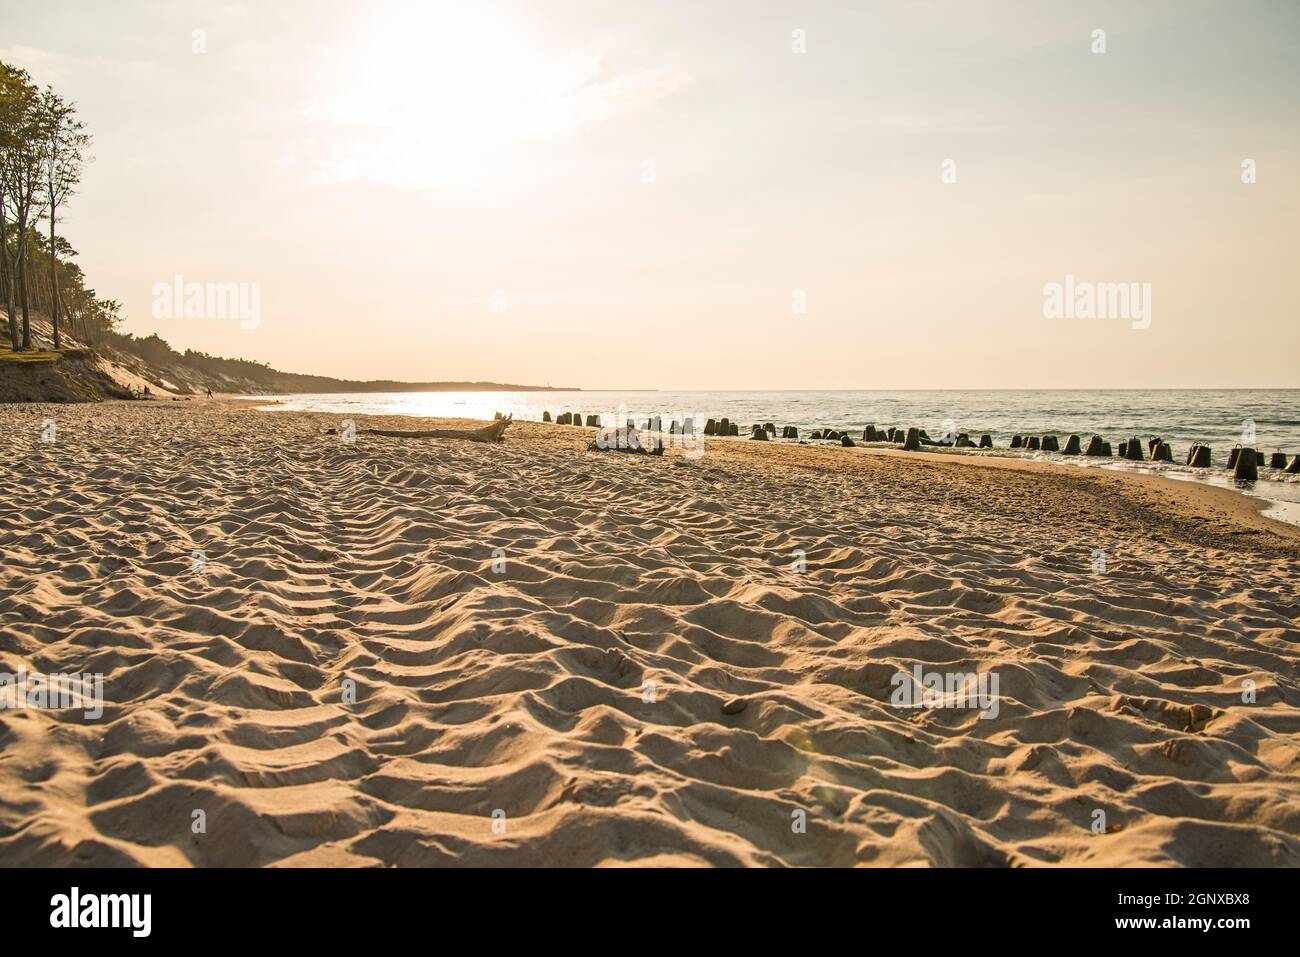 beach of the Baltic Sea with evening sun Stock Photo